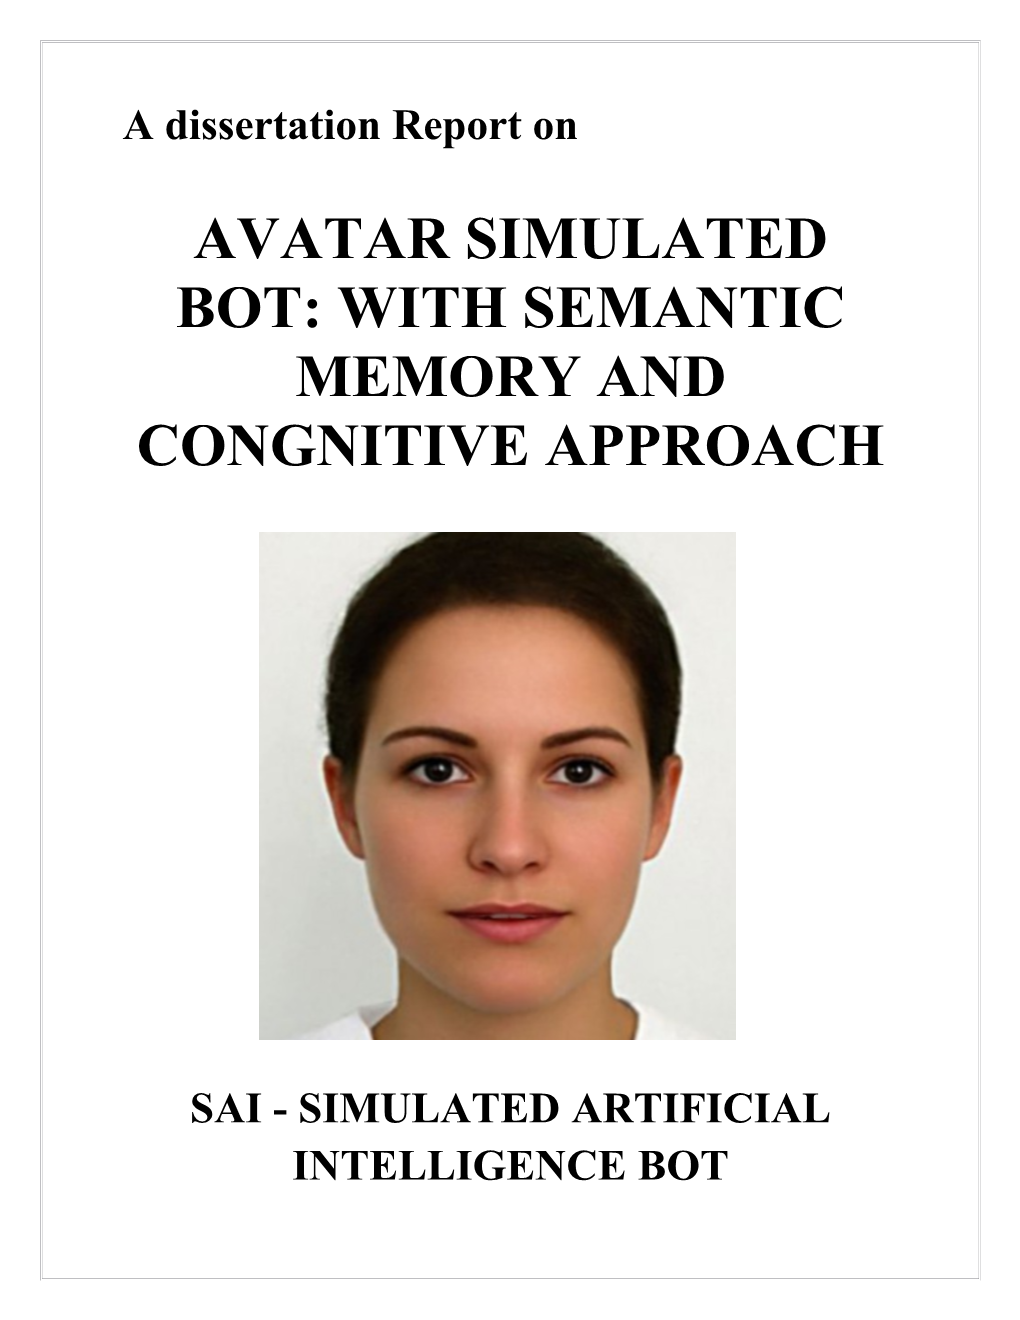 Avatar Simulated Bot: with Semantic Memory and Congnitive Approach